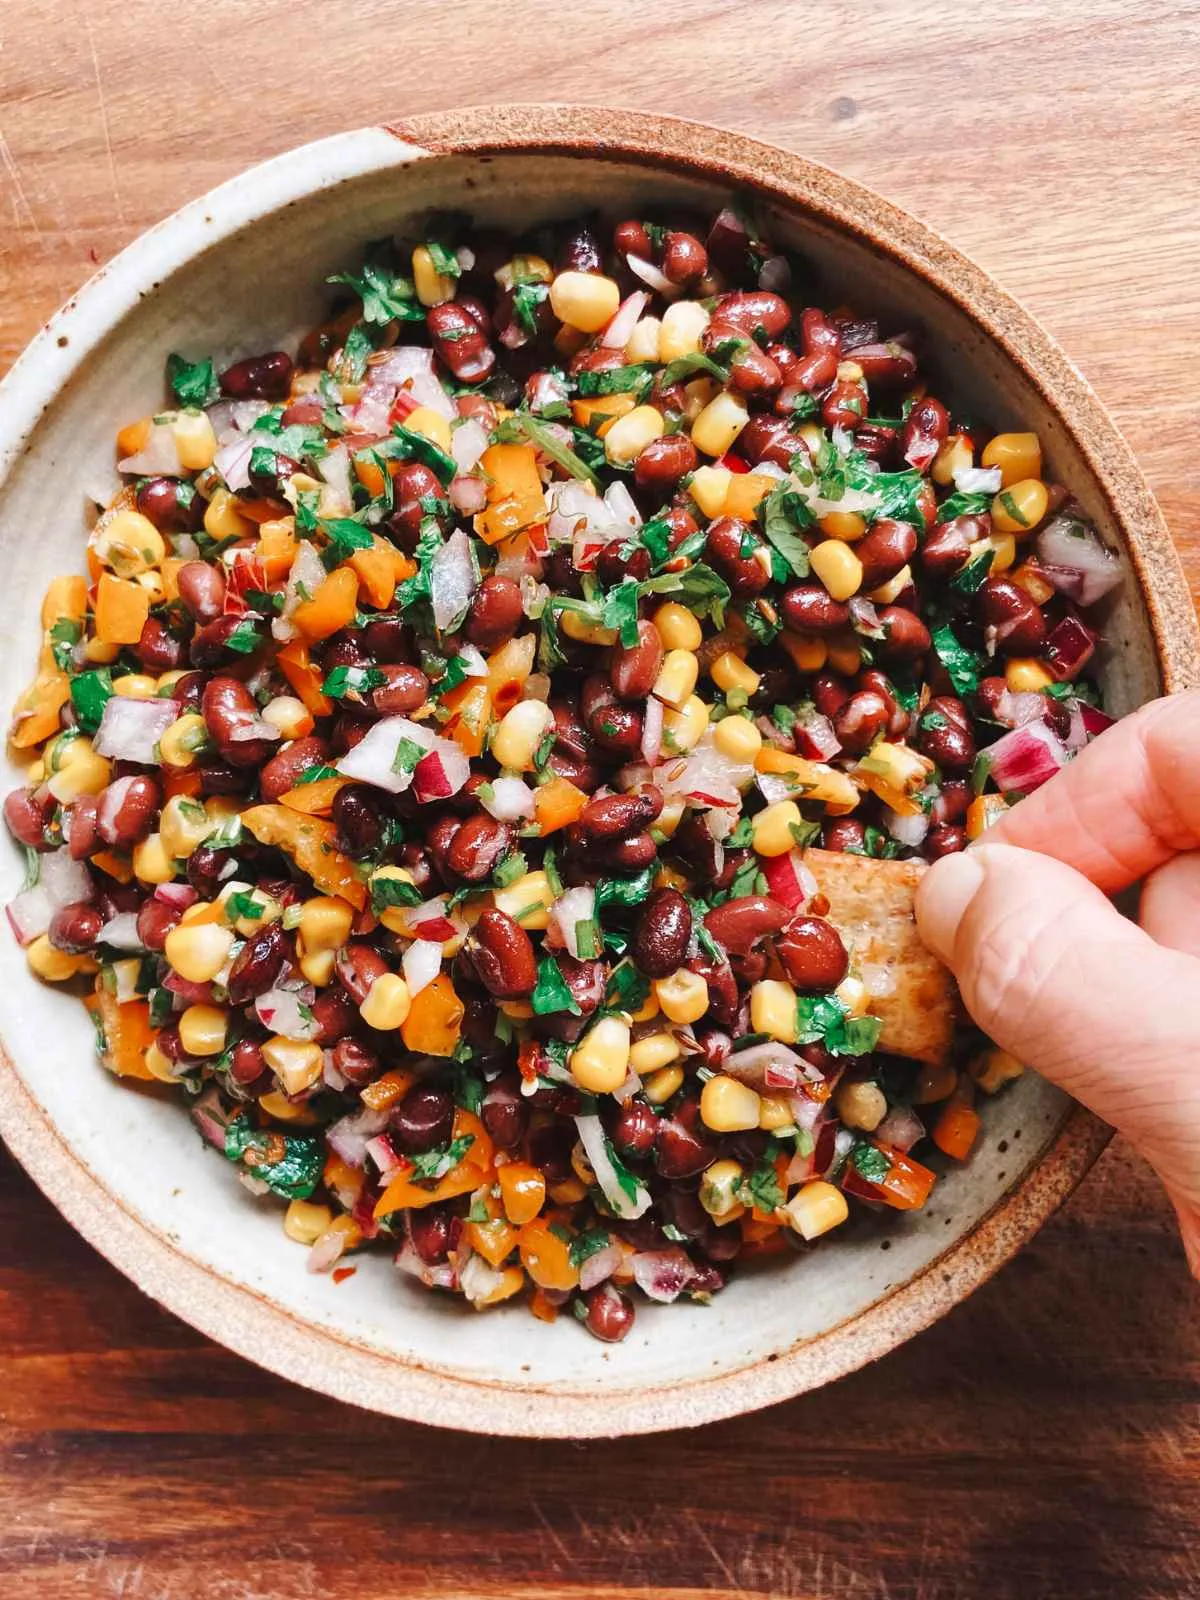 Hang using a chip to scoop up cowboy caviar. 